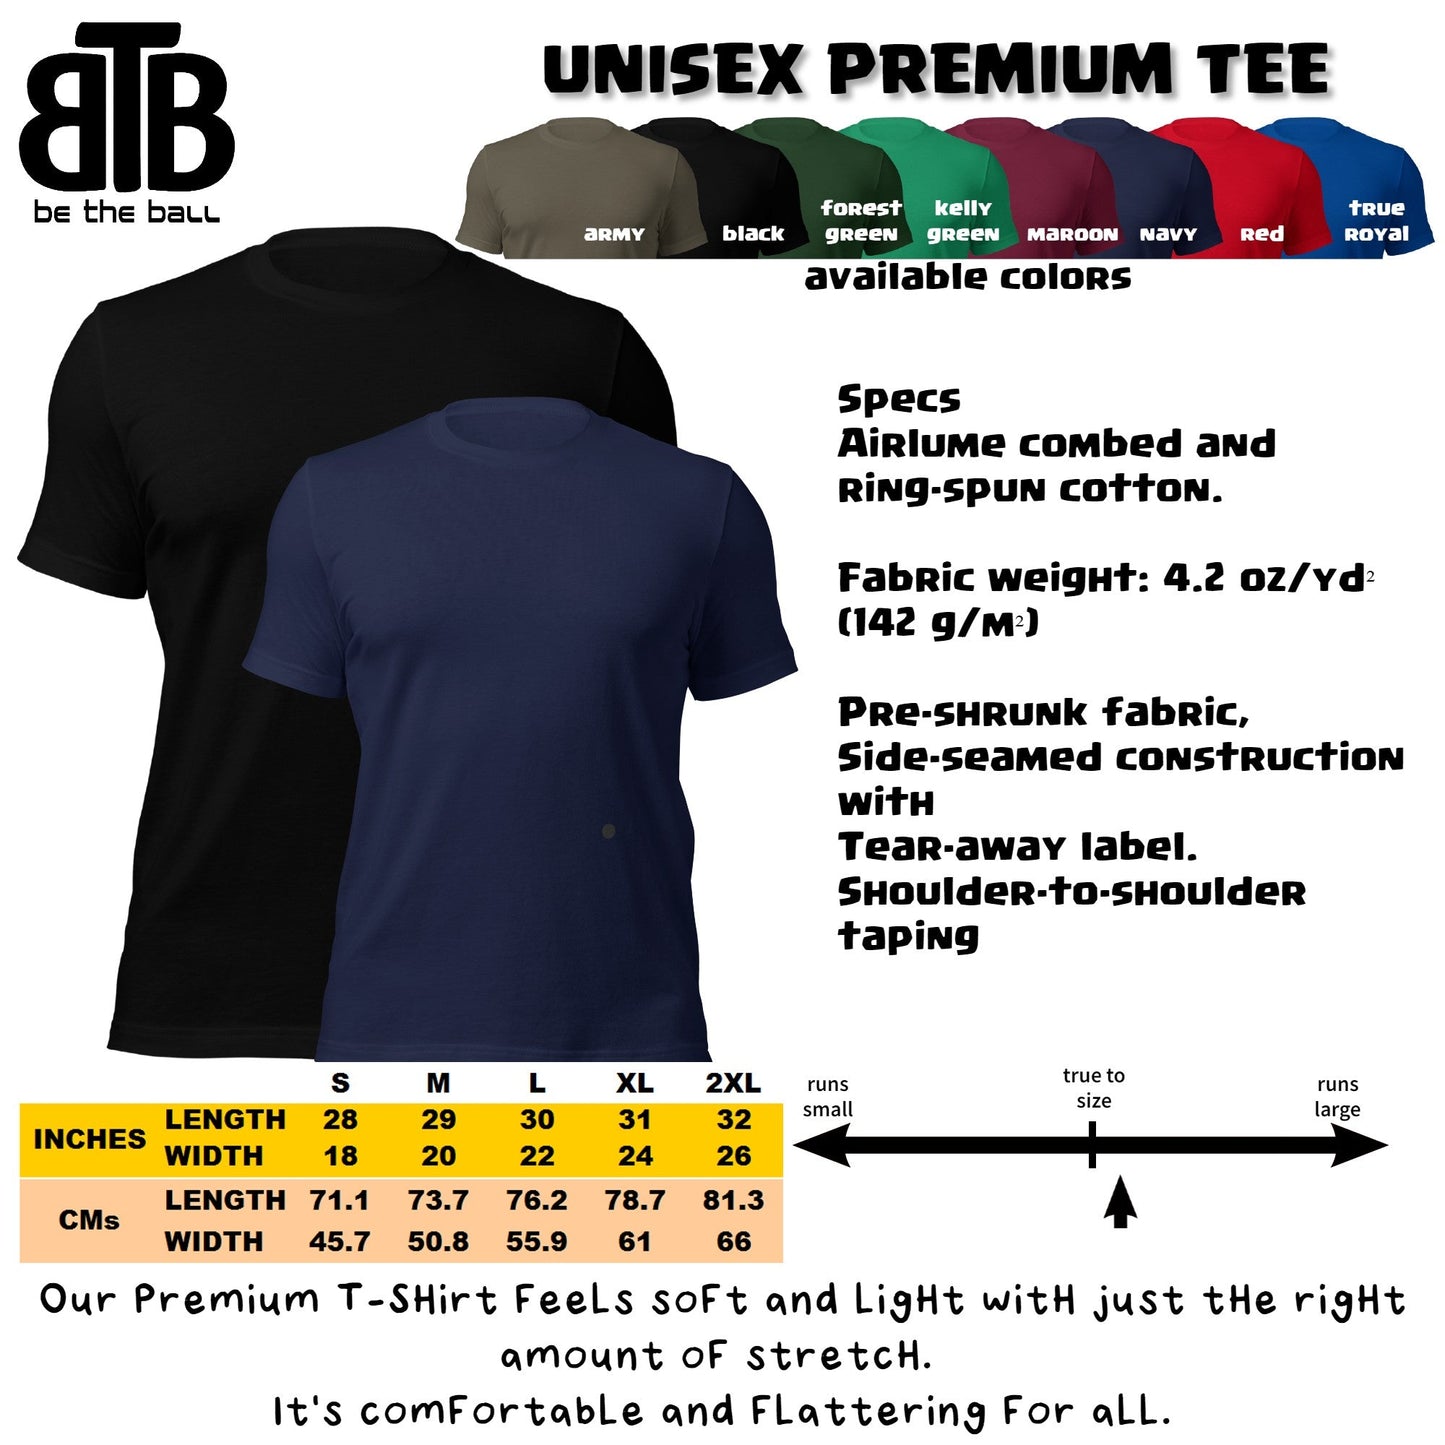 Beware Amateur Golfer TShirt and Hoodie is a Creative Golf Graphic design for Men and Women